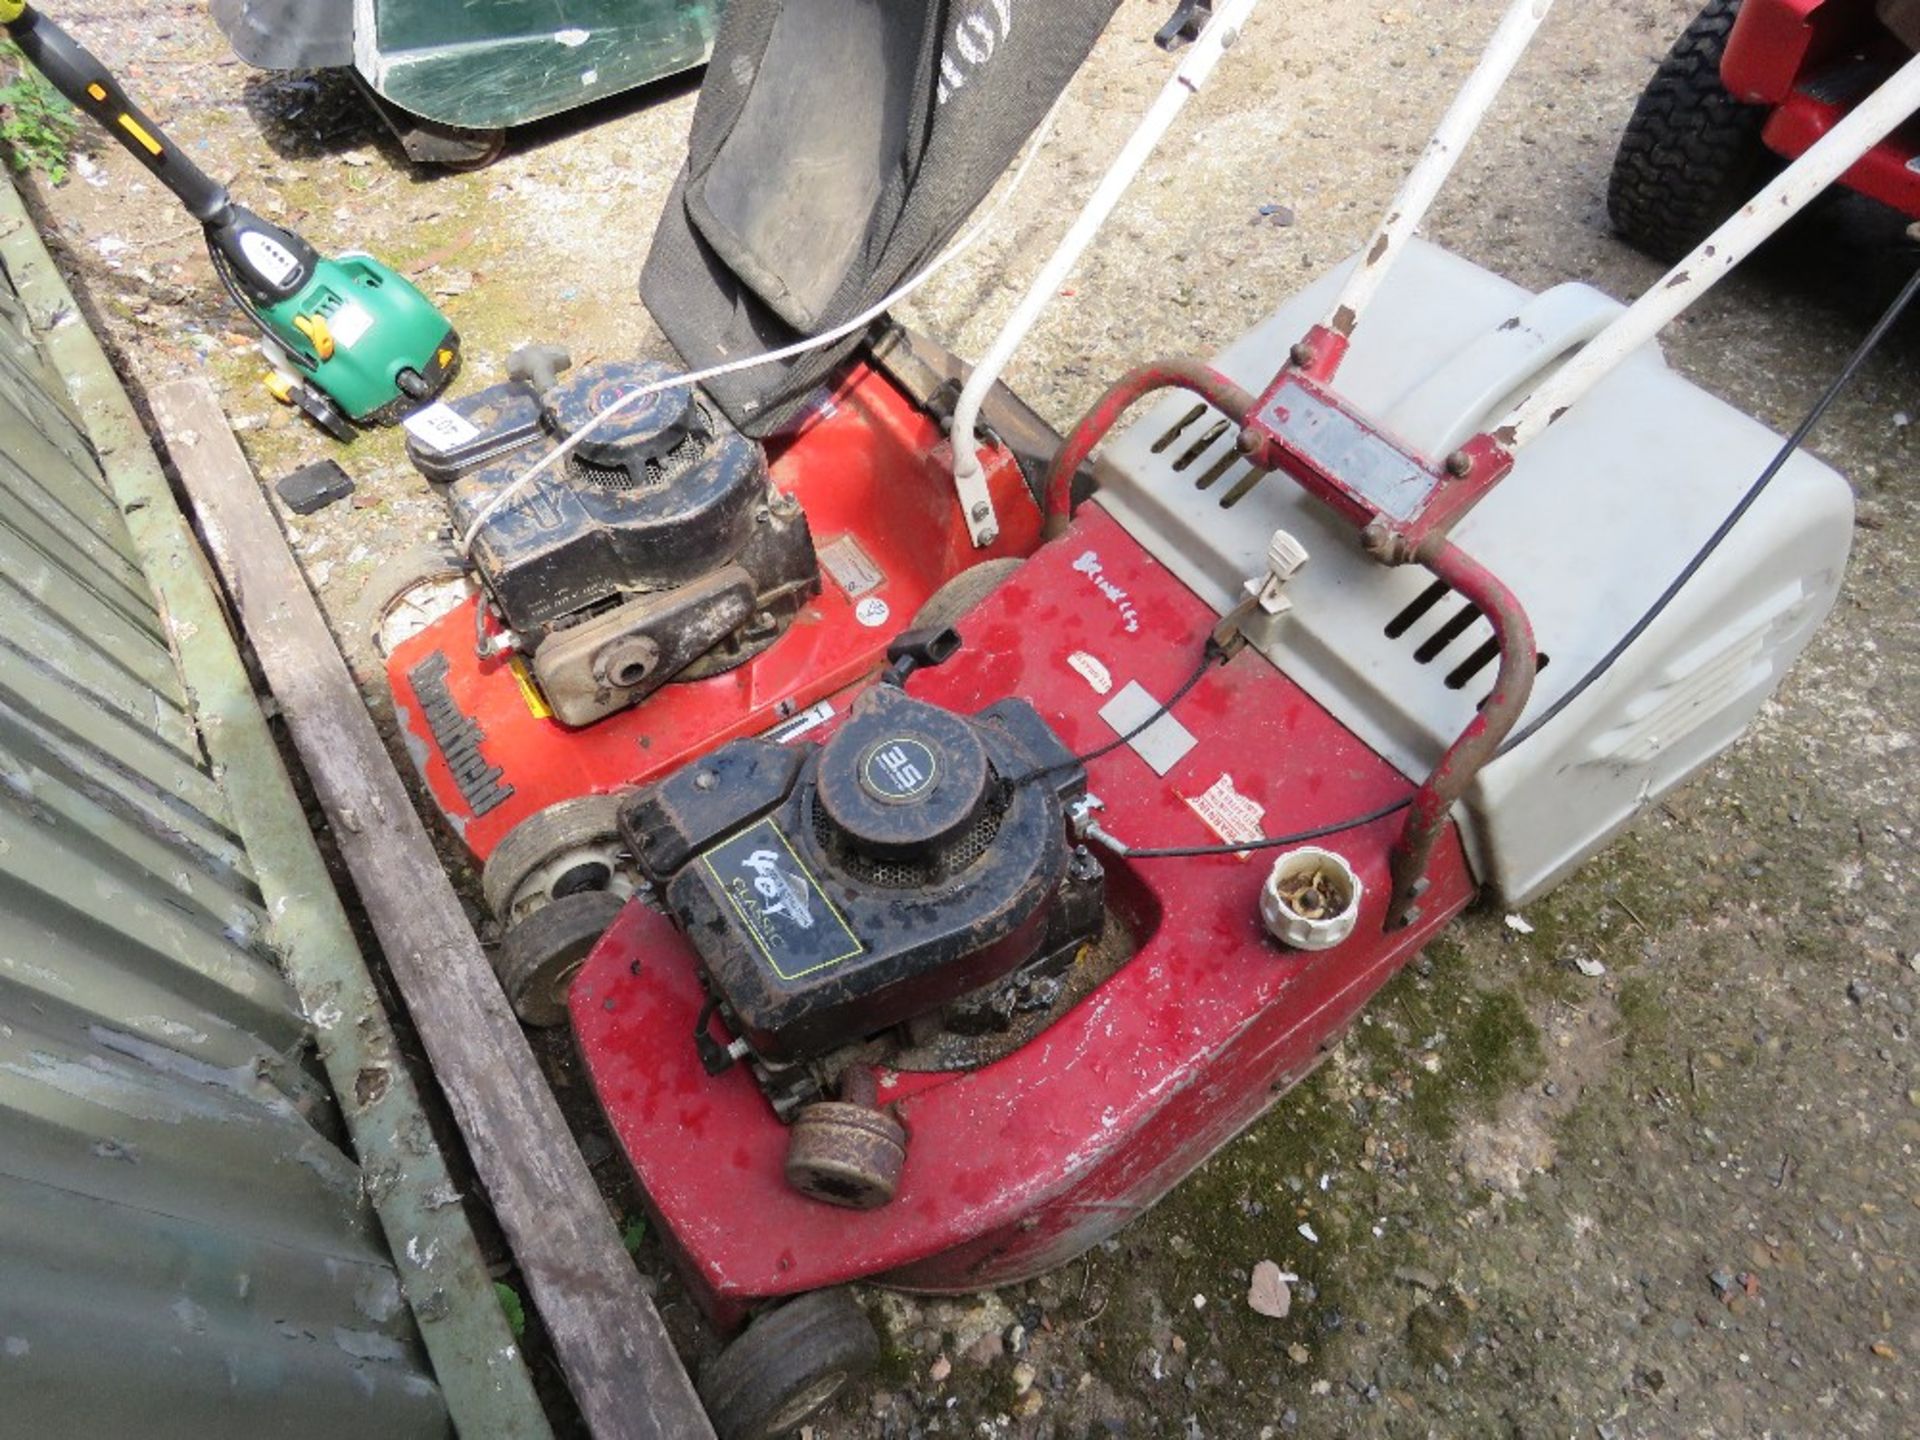 2 X PETROL ENGINED LAWN MOWERS. - Image 4 of 6